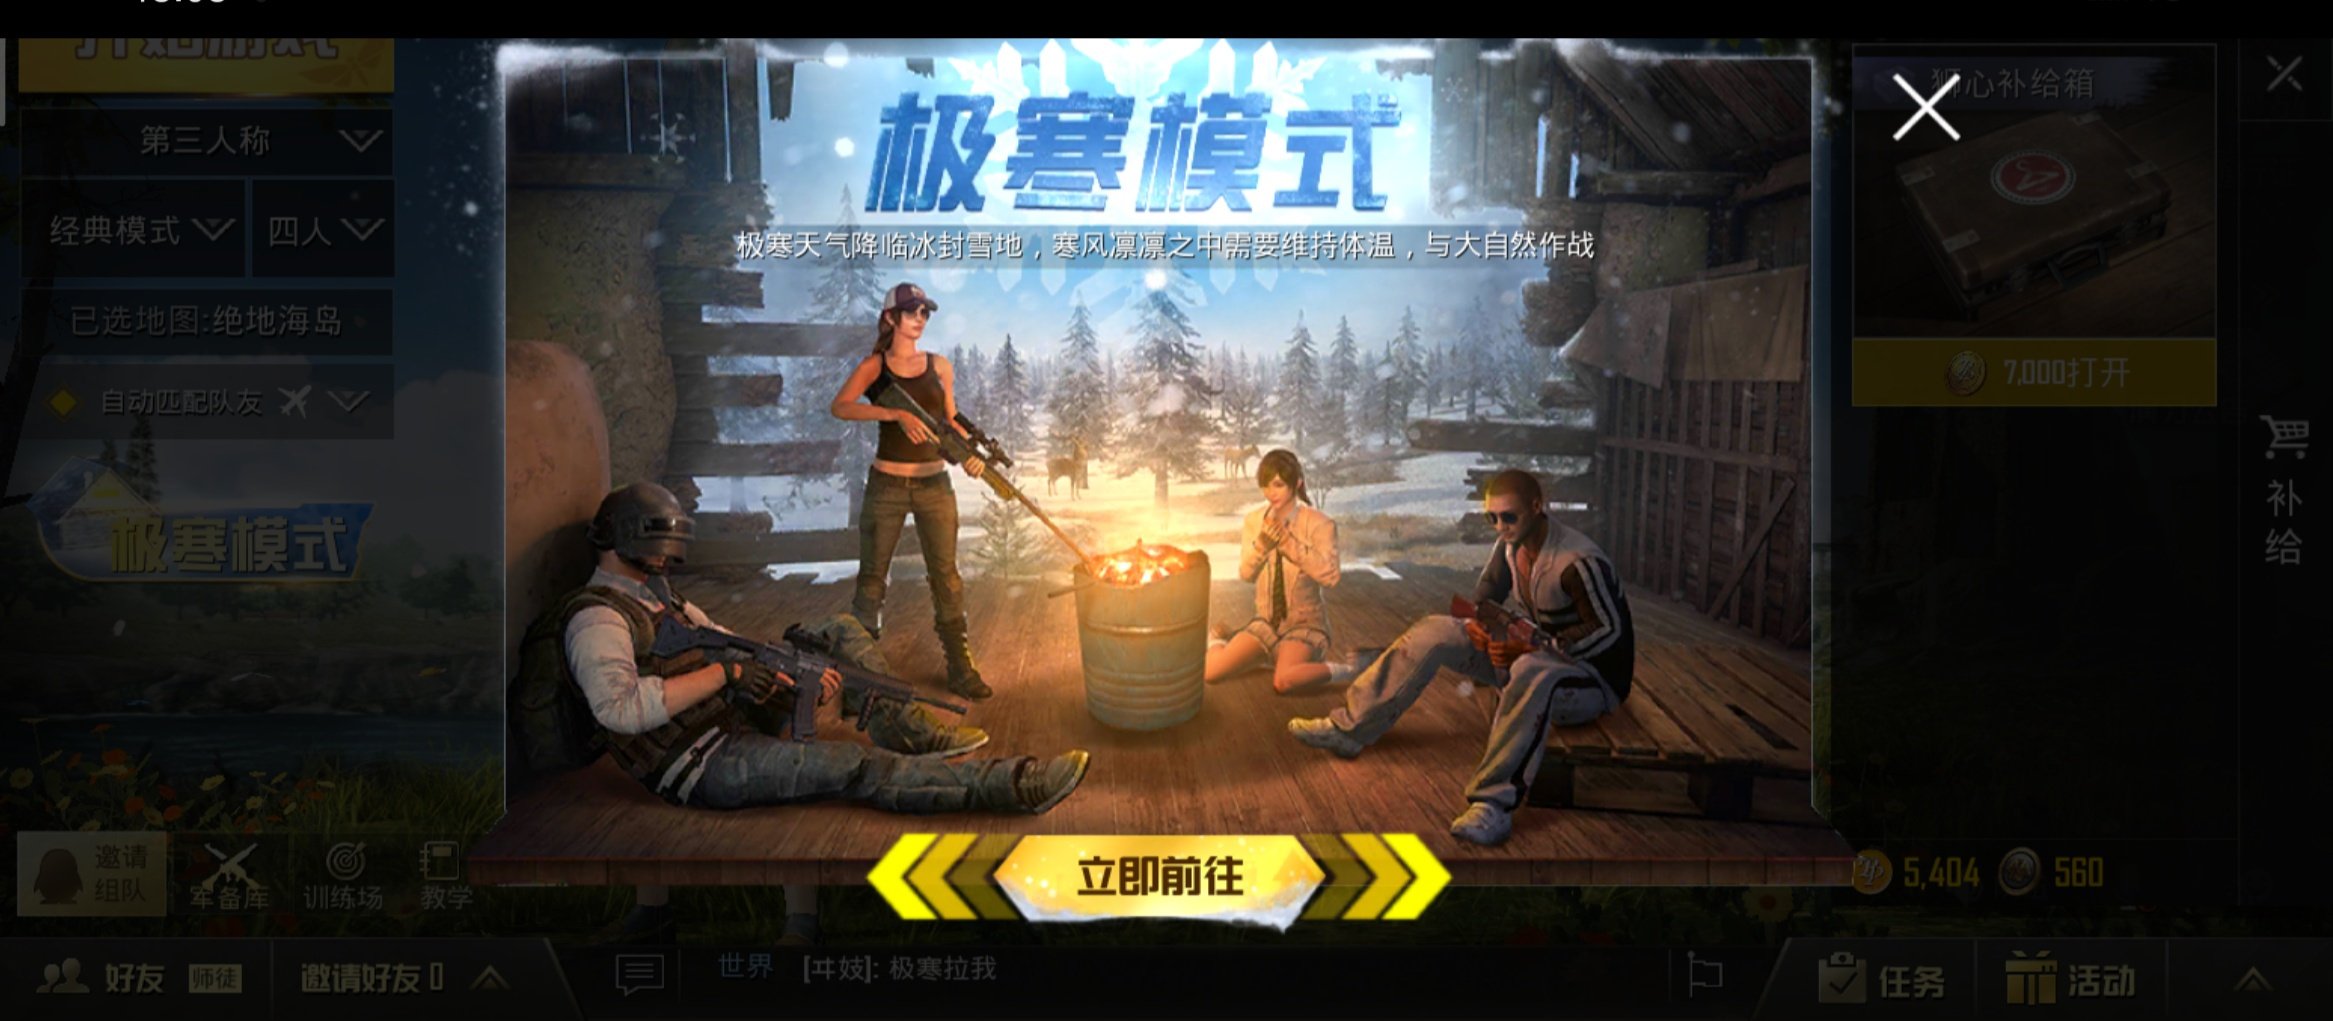 Pubg Mobile S Latest Update Adds A New Adversary Mother Nature South China Morning Post